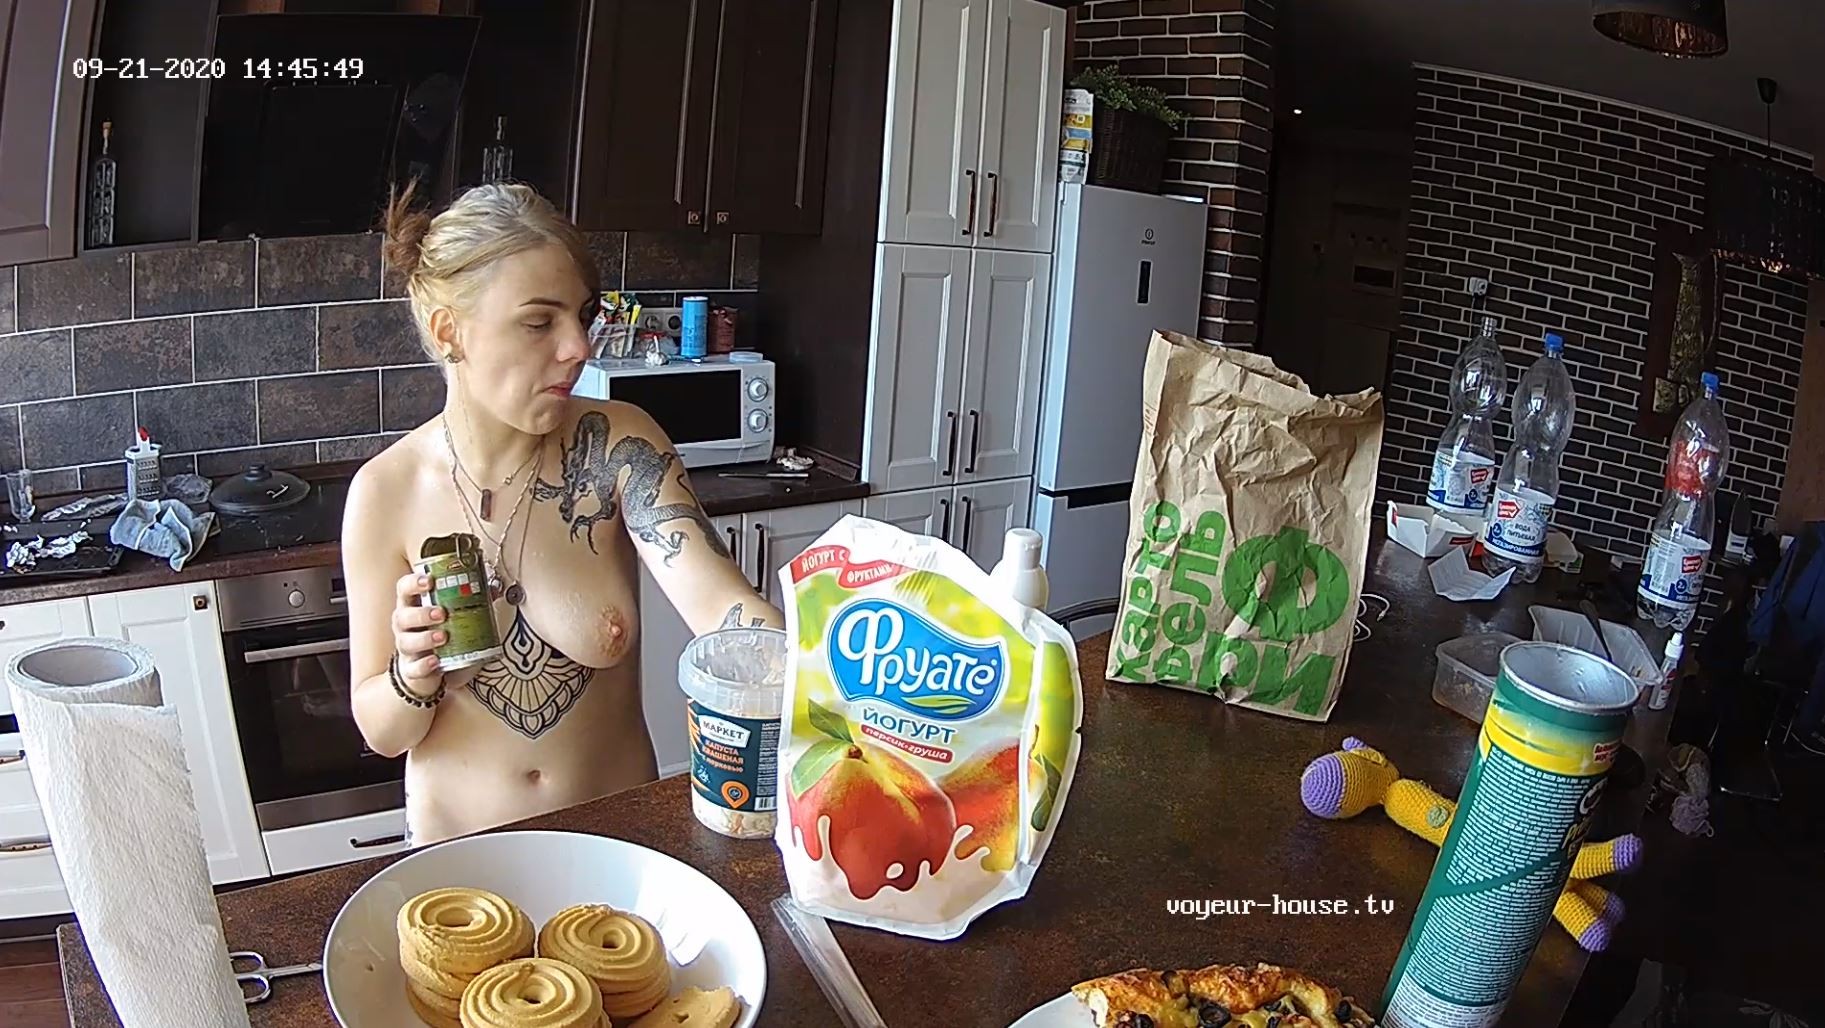 Dina getting naked and eating snack, Sep21/20